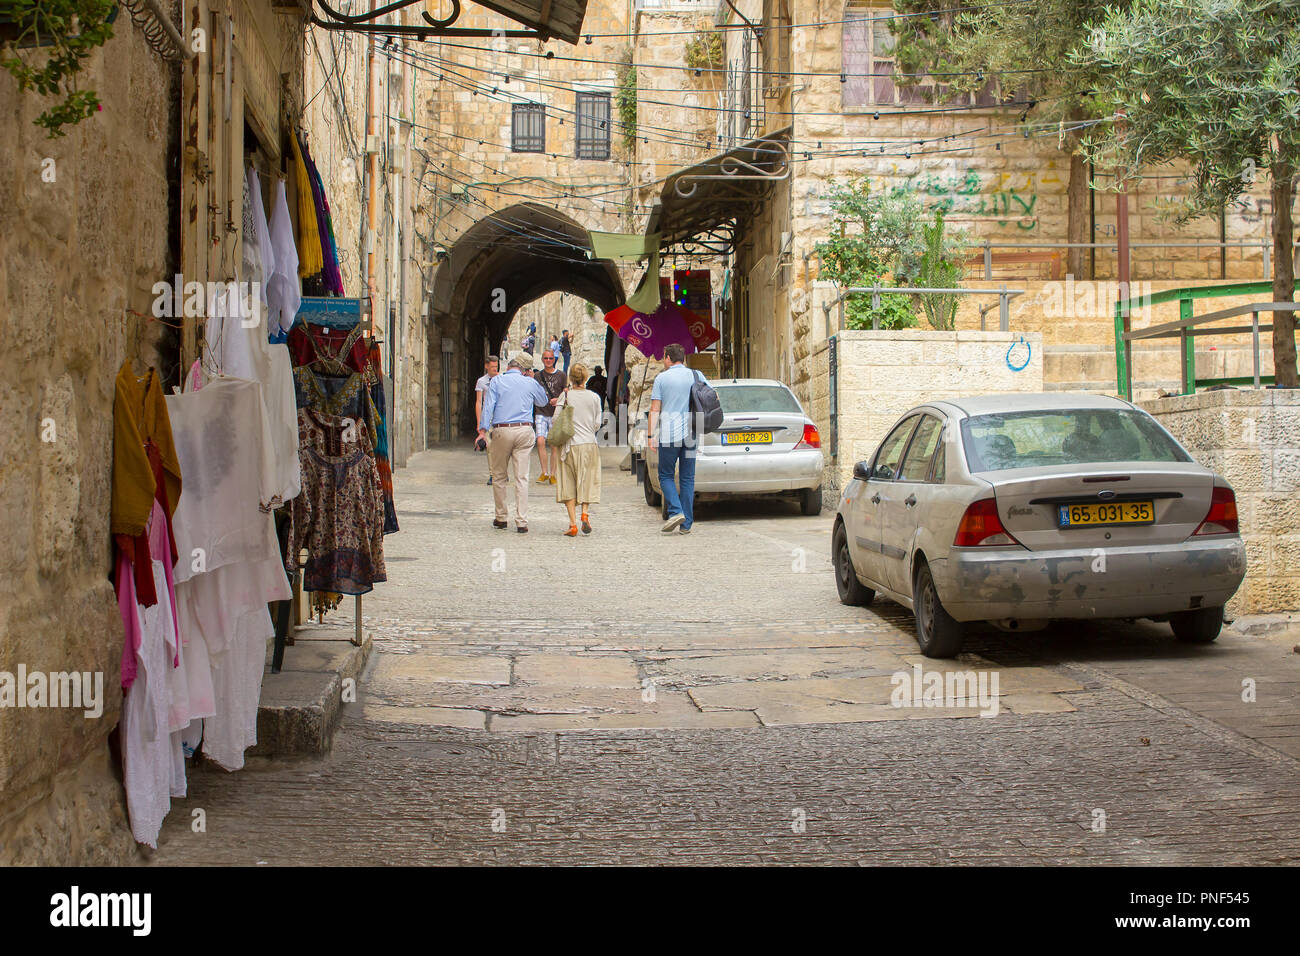 10 May 2018 Tourists strolling up the narrow Lions Gate Street in the old city Jerusalem Israel. The street has parked cars and shop goods on display  Stock Photo